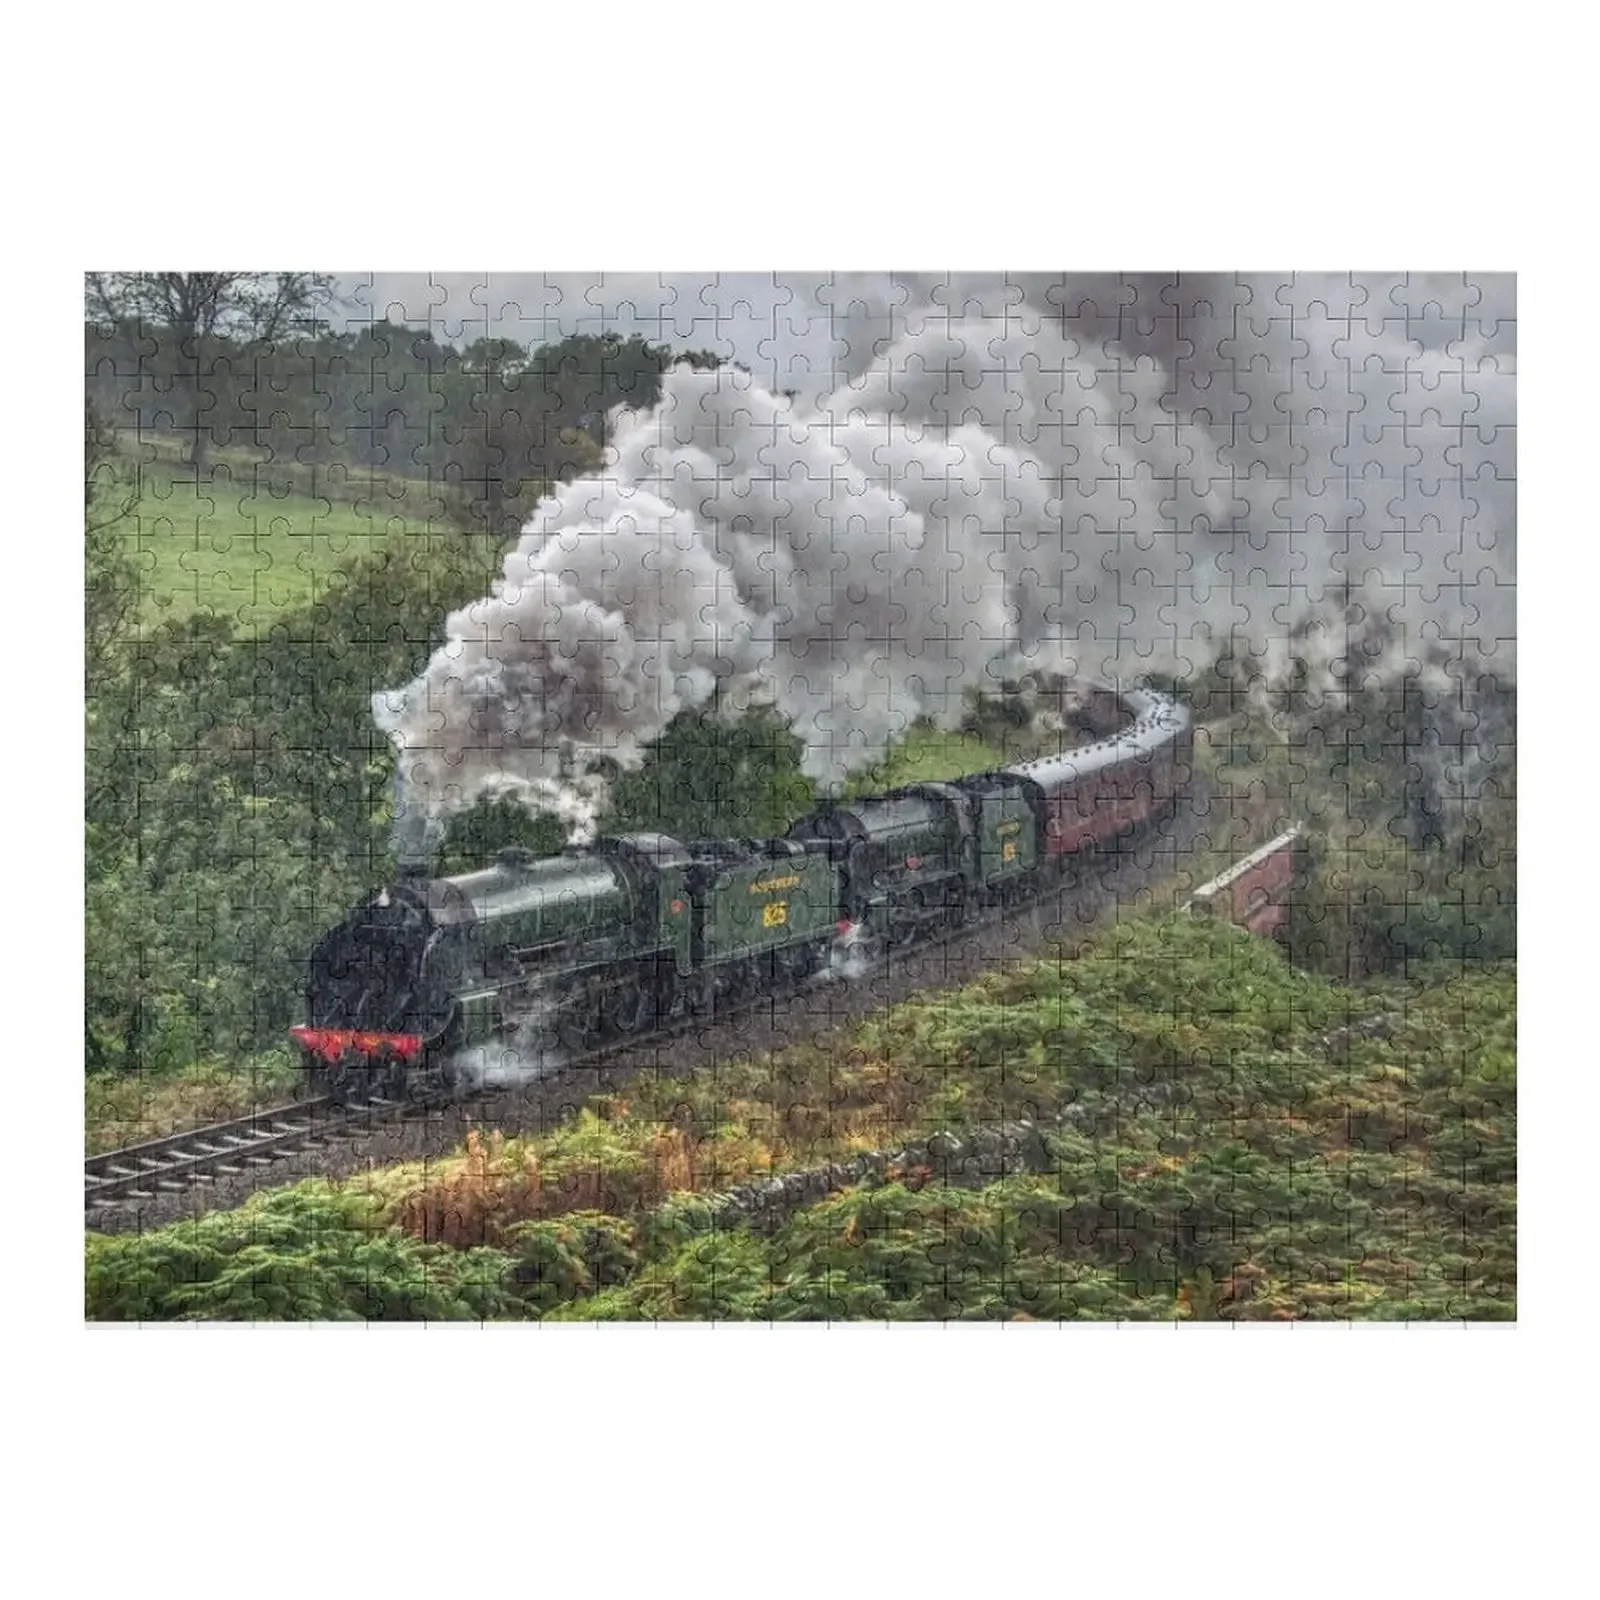 A pair of Southern Railways Locomotives in the rain Jigsaw Puzzle Jigsaw Pieces Adults Personalized Gift Married Puzzle 1 pair ice skate cover guard protector blade guards for hockey skates figure skates ice skates skating for kids adults хоккей 하키